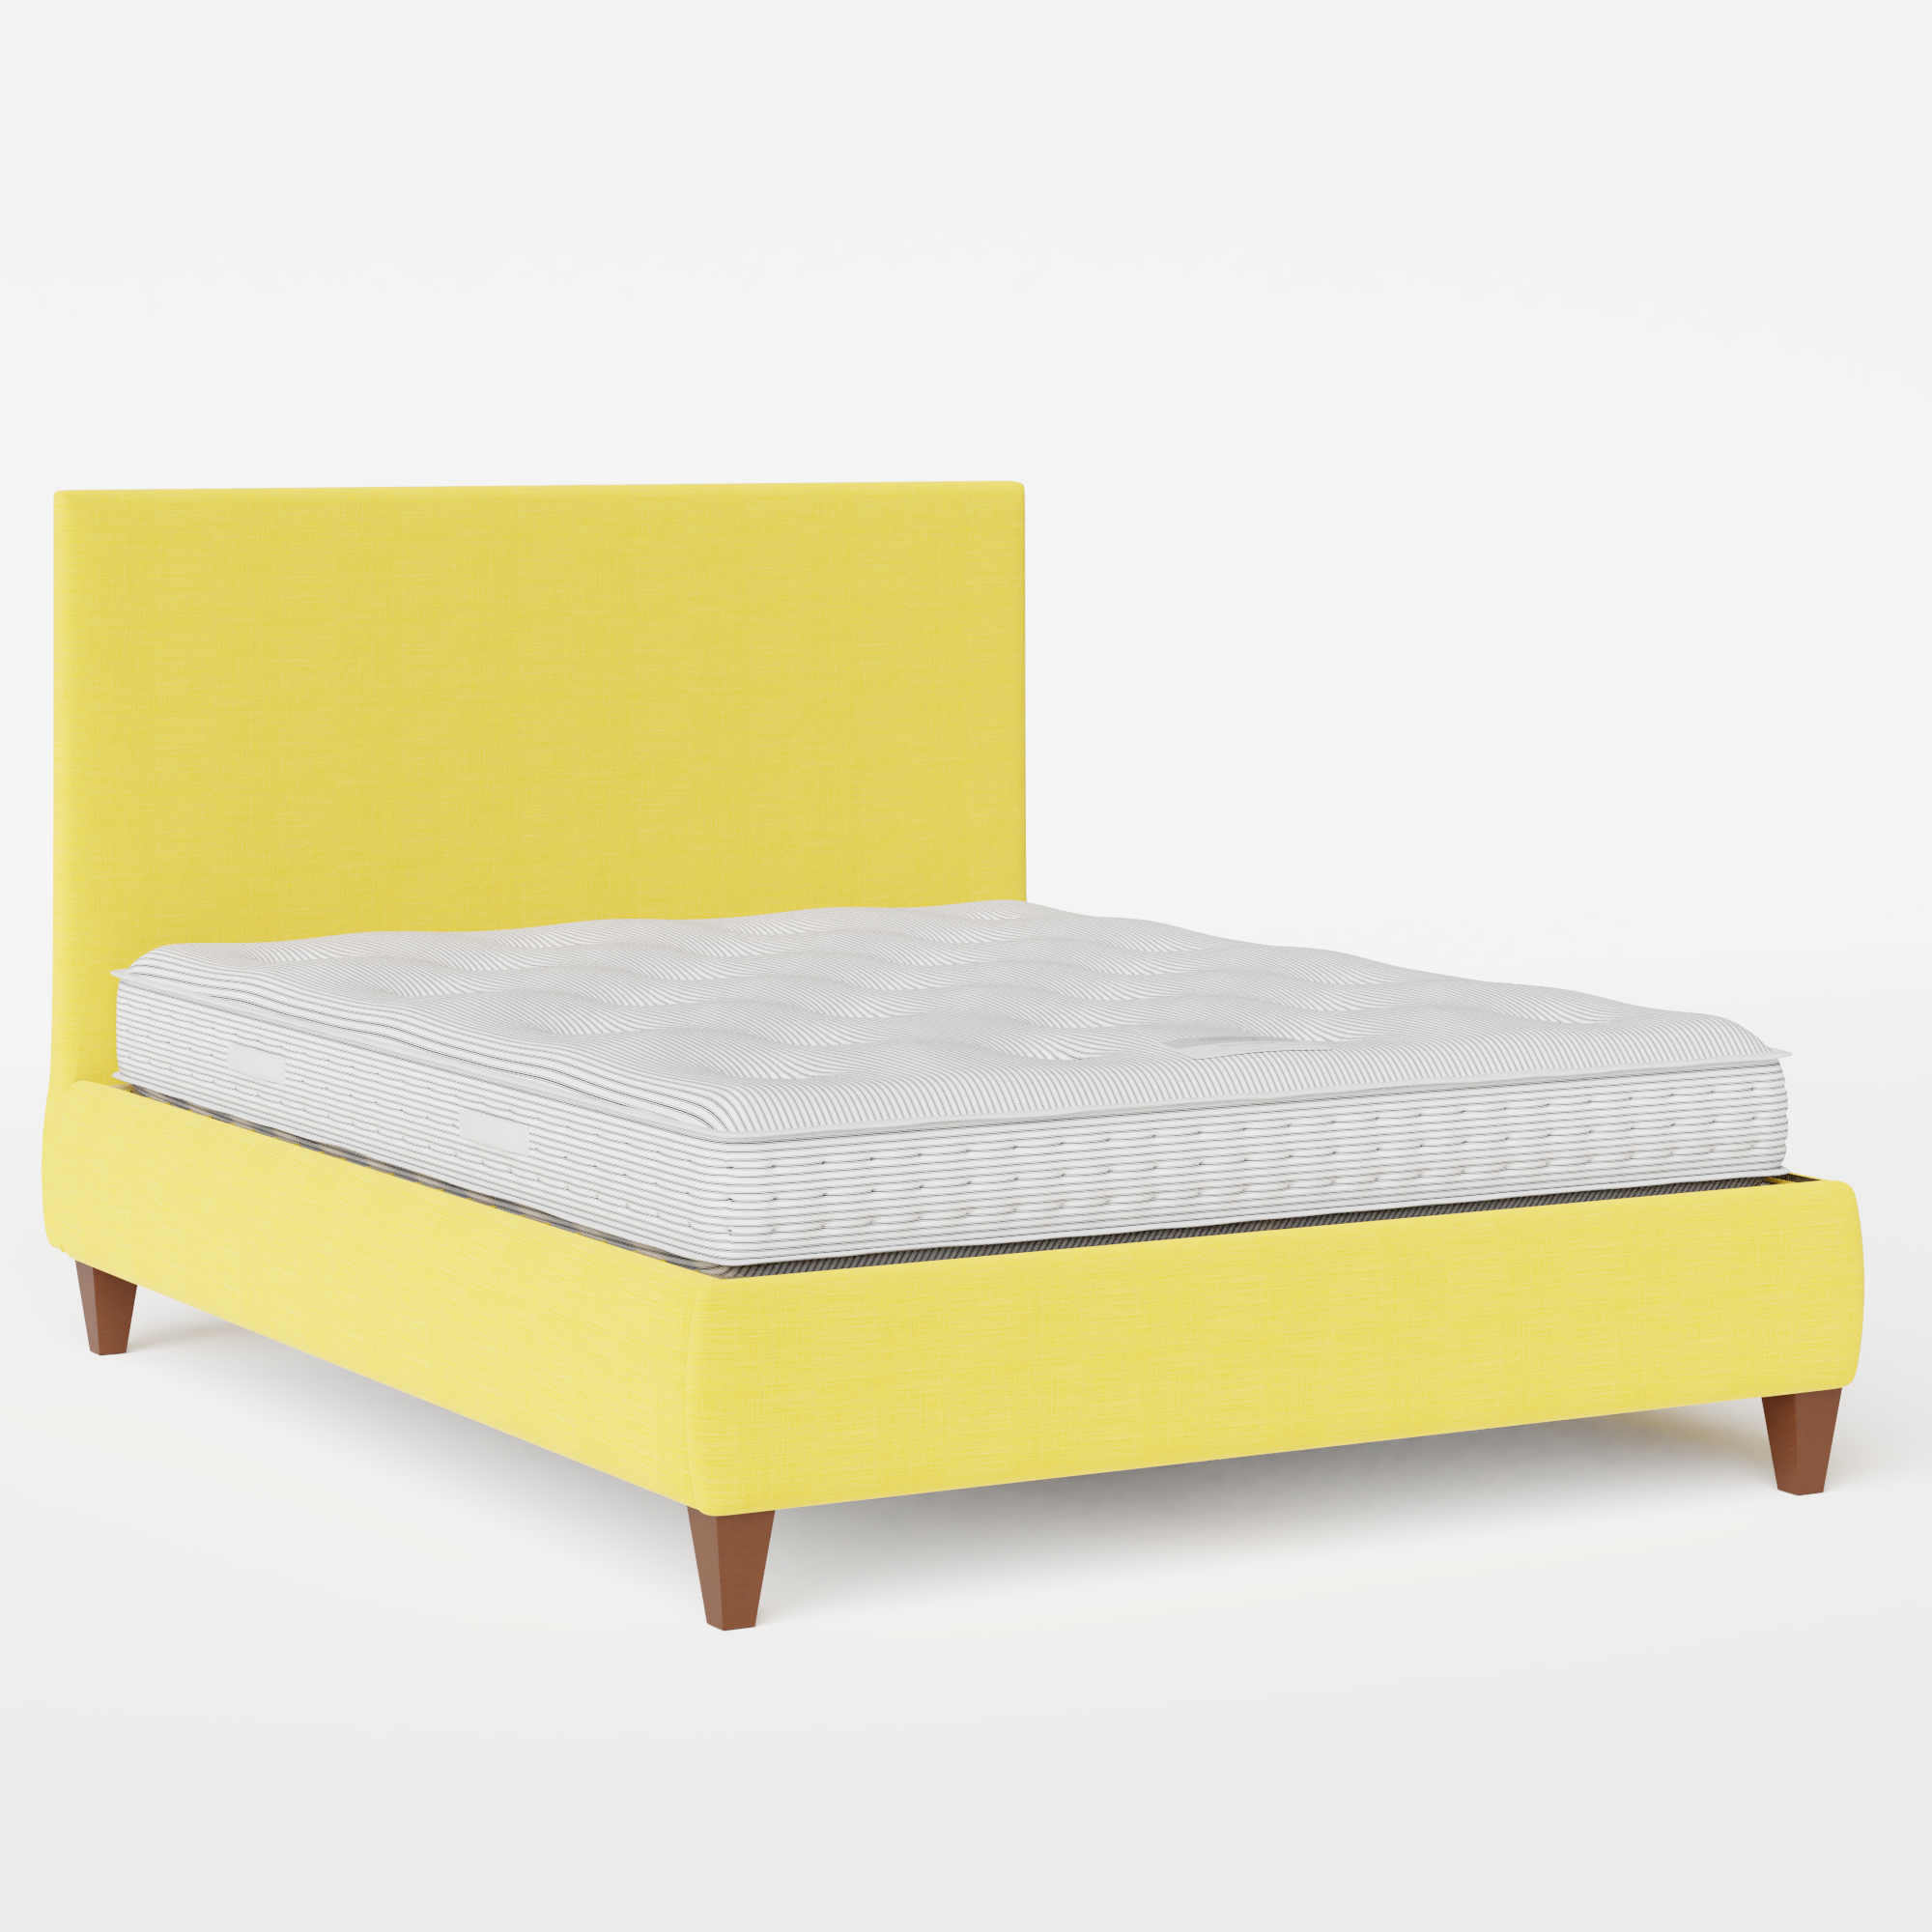 Yushan upholstered bed in sunflower fabric